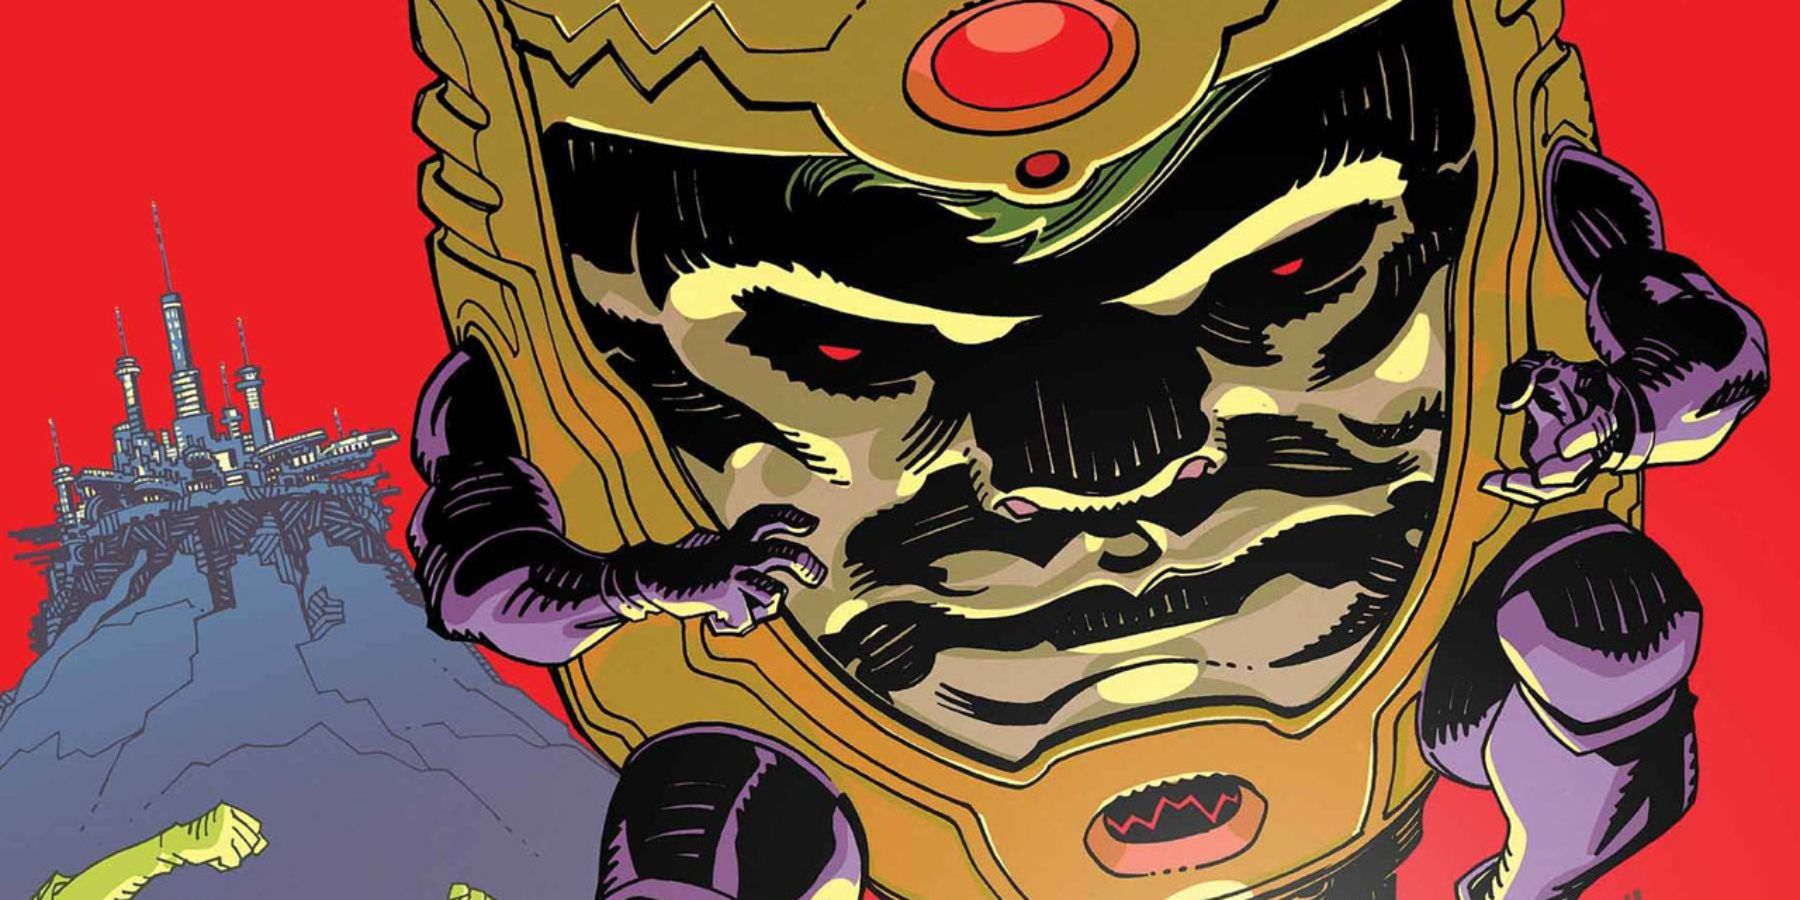 Ant-Man 3 MODOK in Marvel Comics with red background